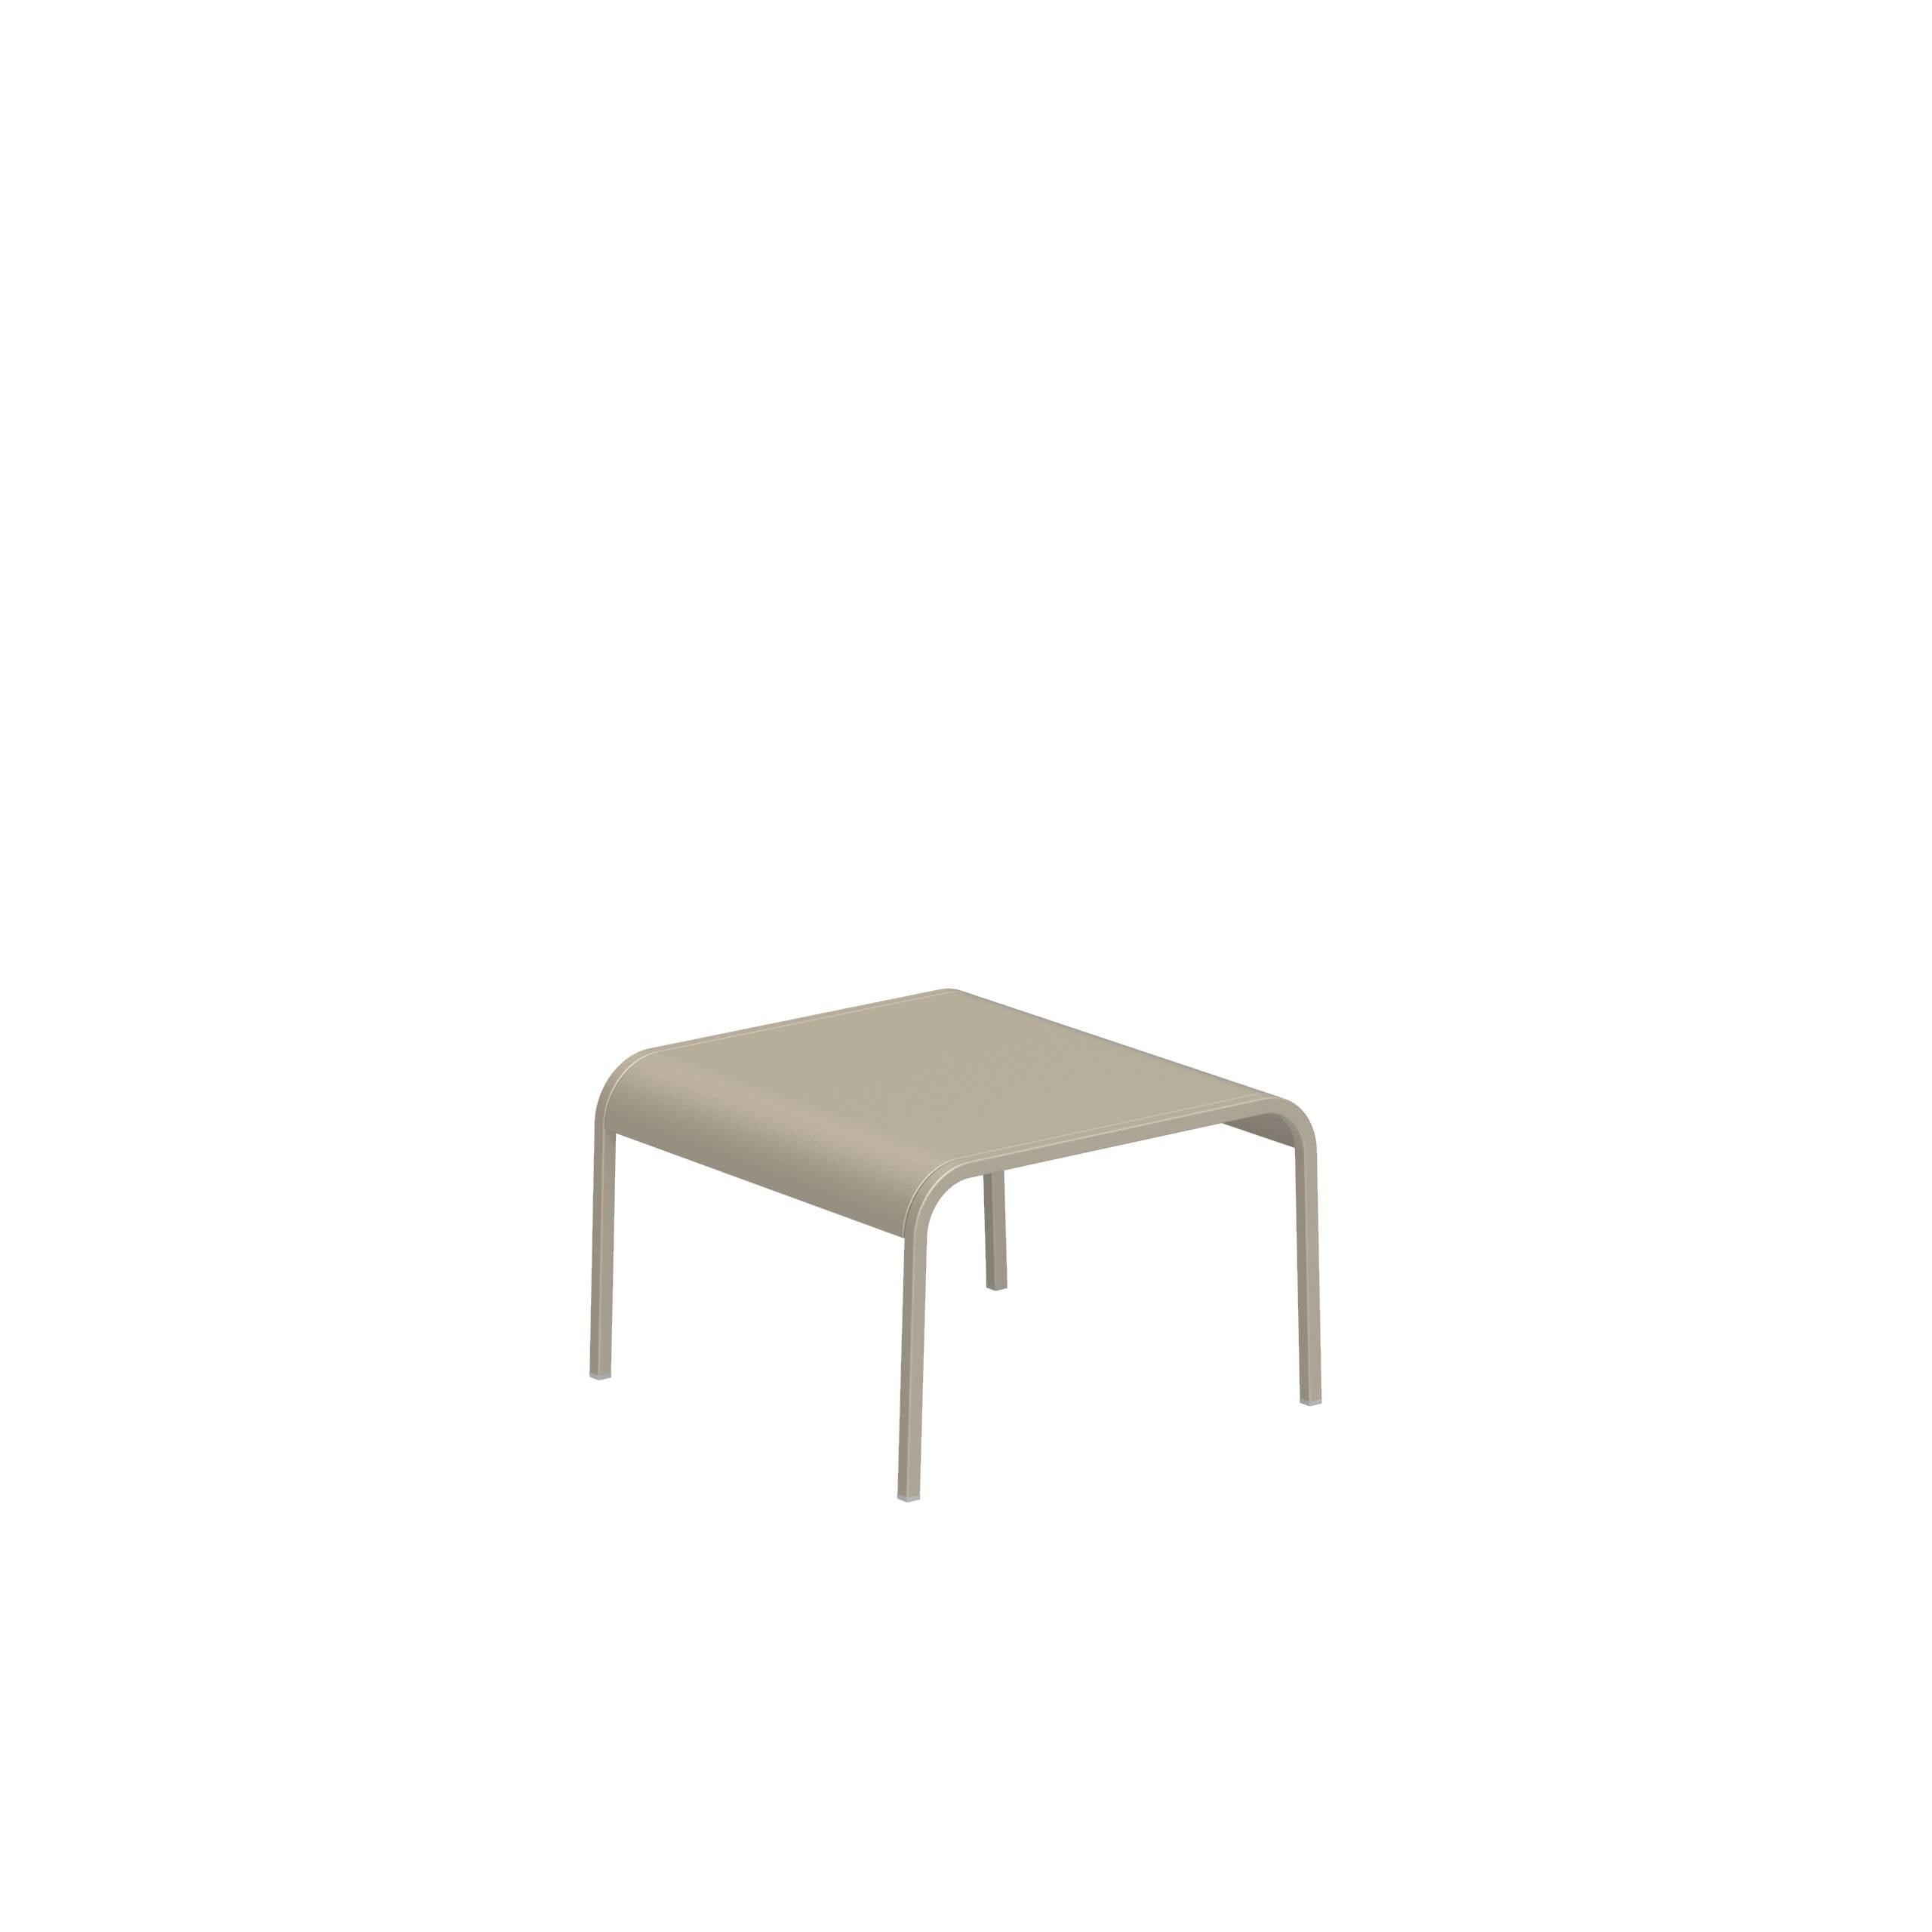 Qt50 Side Table 50x50cm Sand With Alu Top Sand